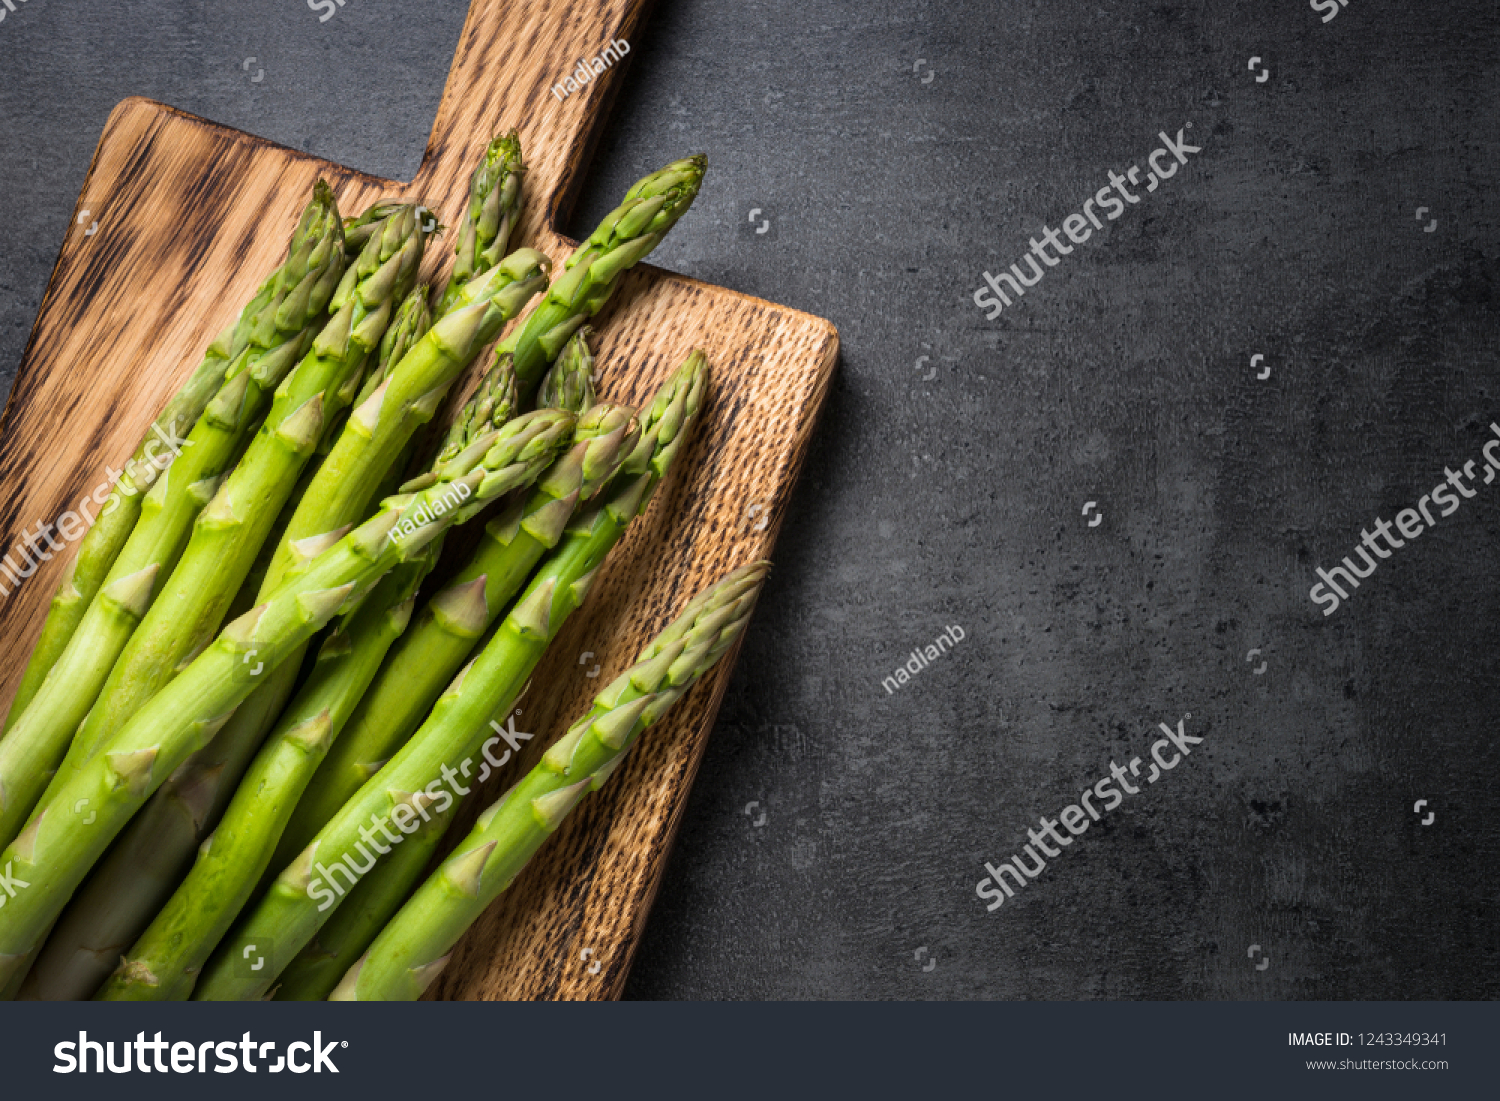 Asparagus. Fresh green asparagus on black slate background. Top view copy space. #1243349341